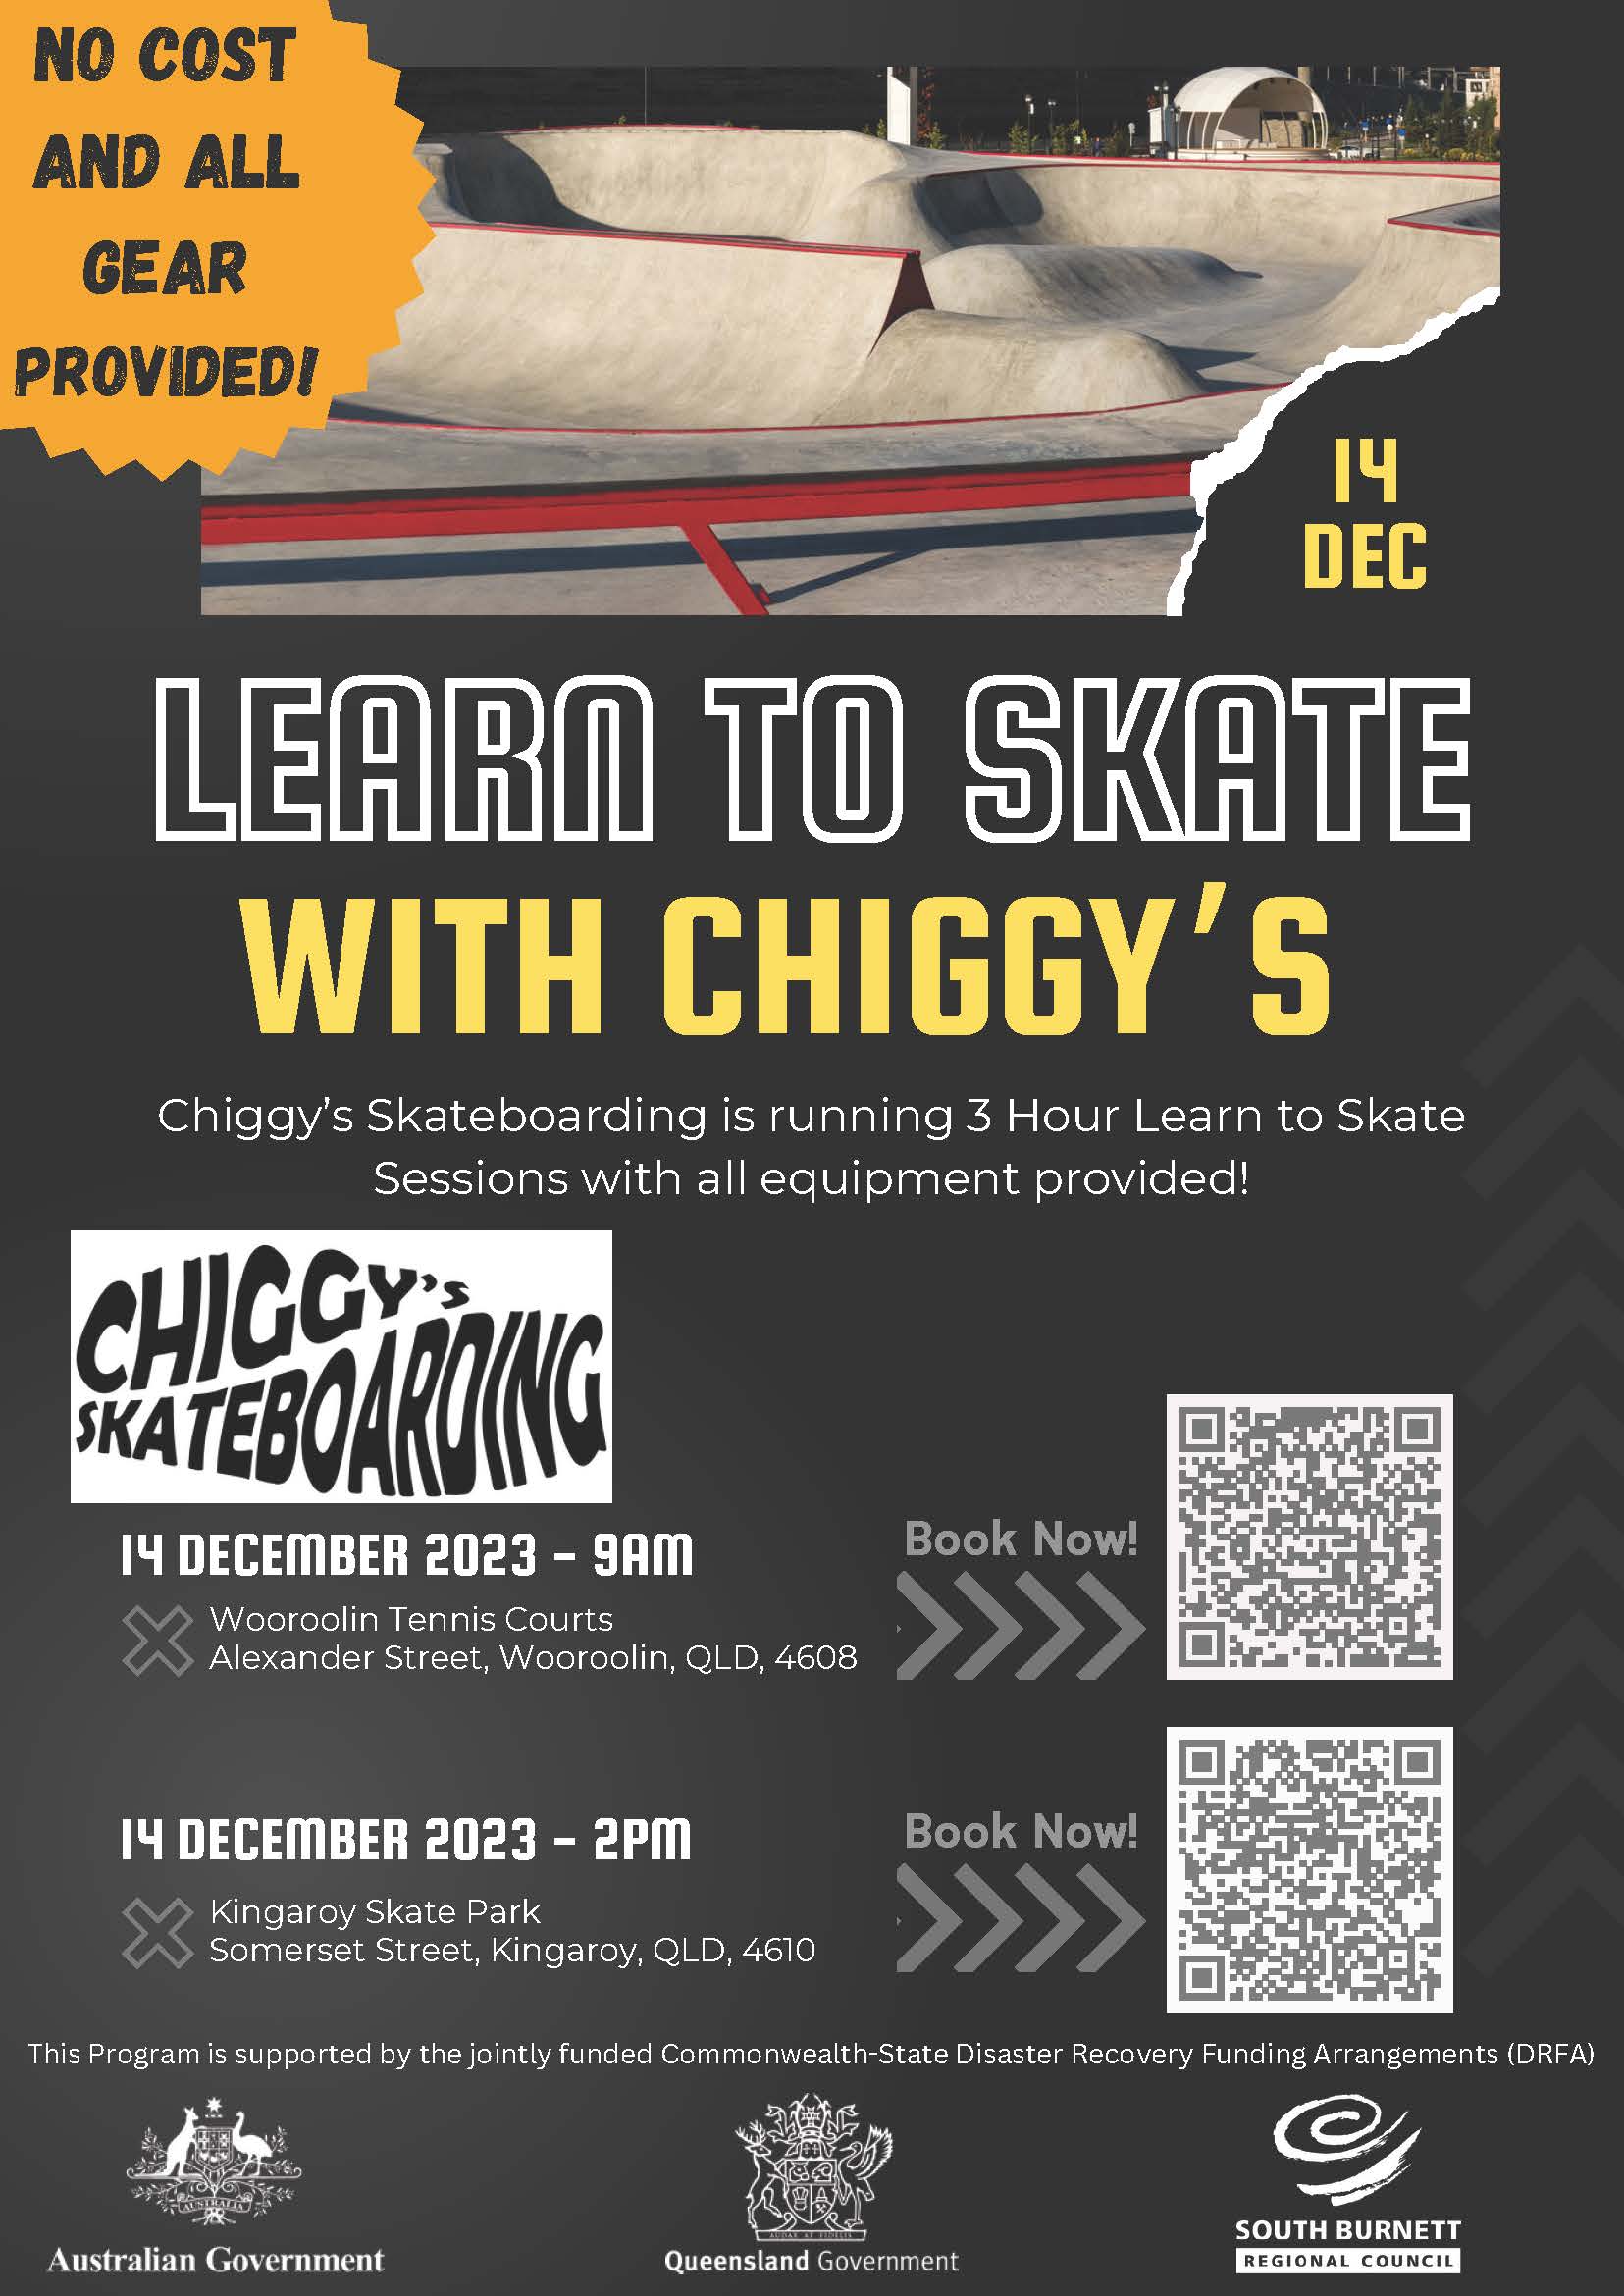 23 11 23 Skating with chiggy flyer 002 1